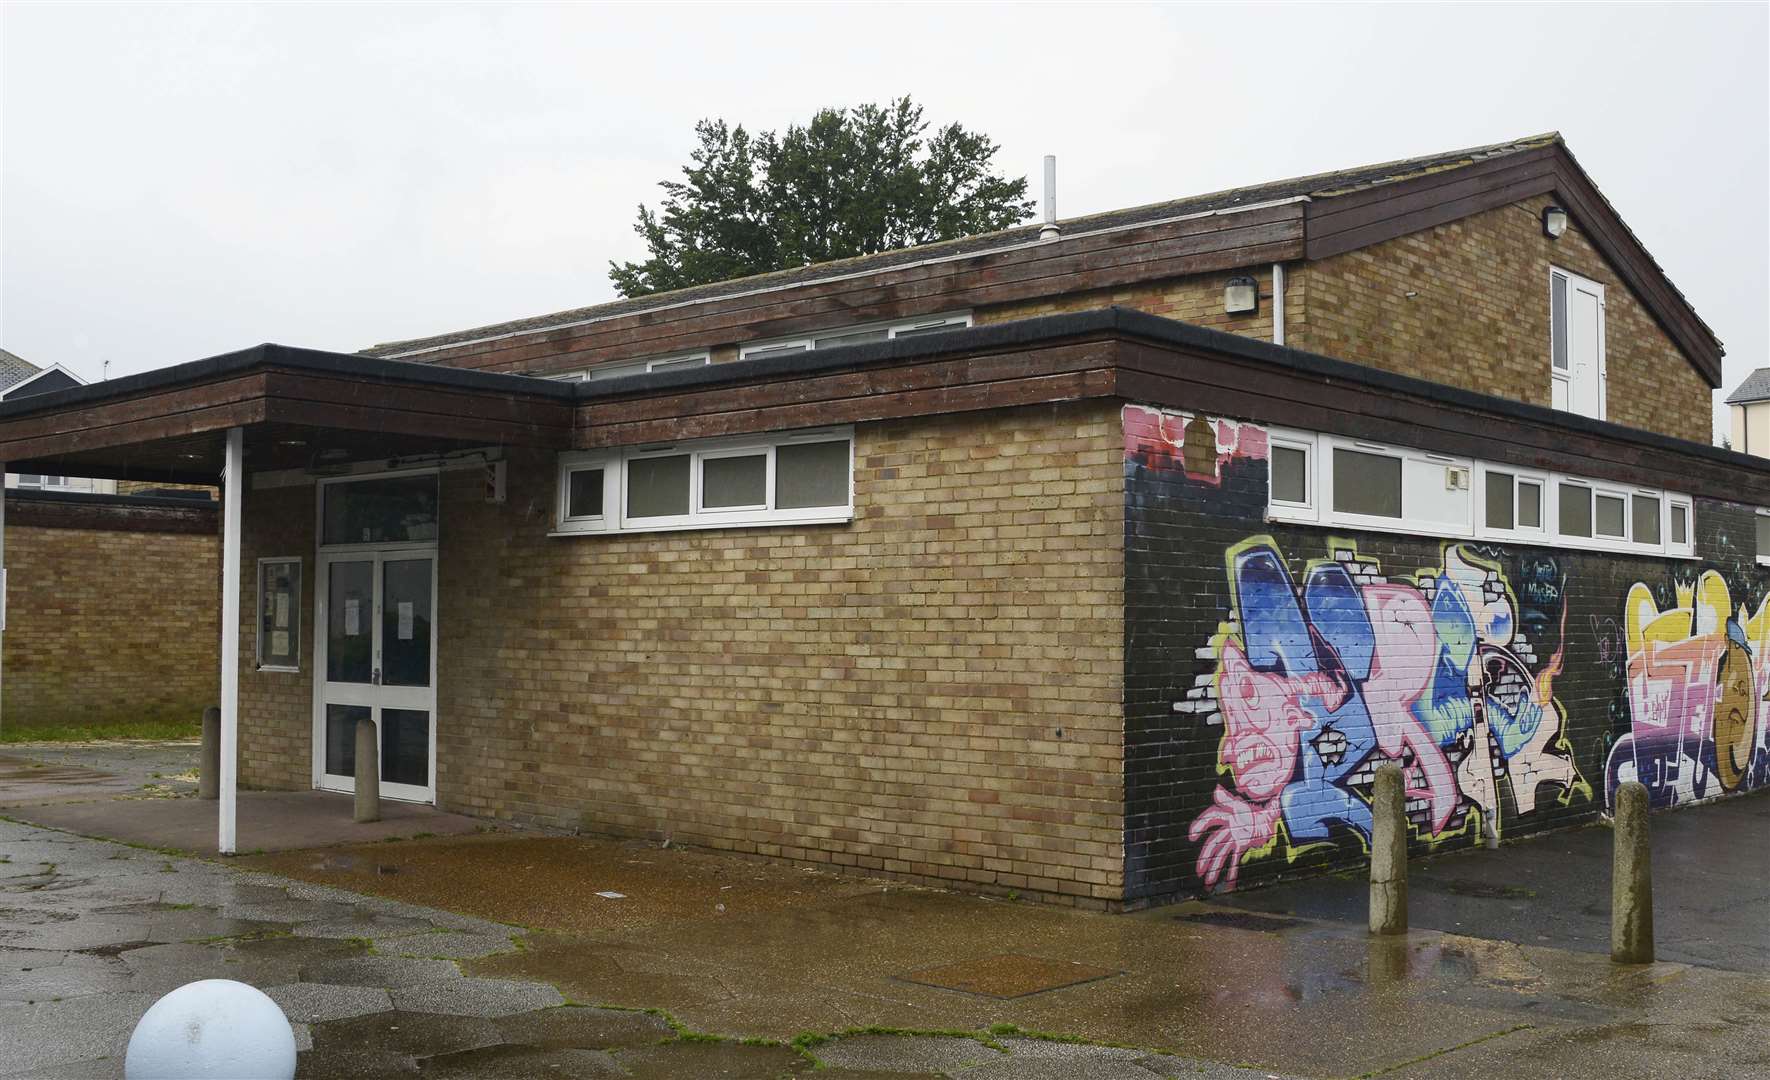 Traders say the loss of the Bockhanger Community Centre has hurt business